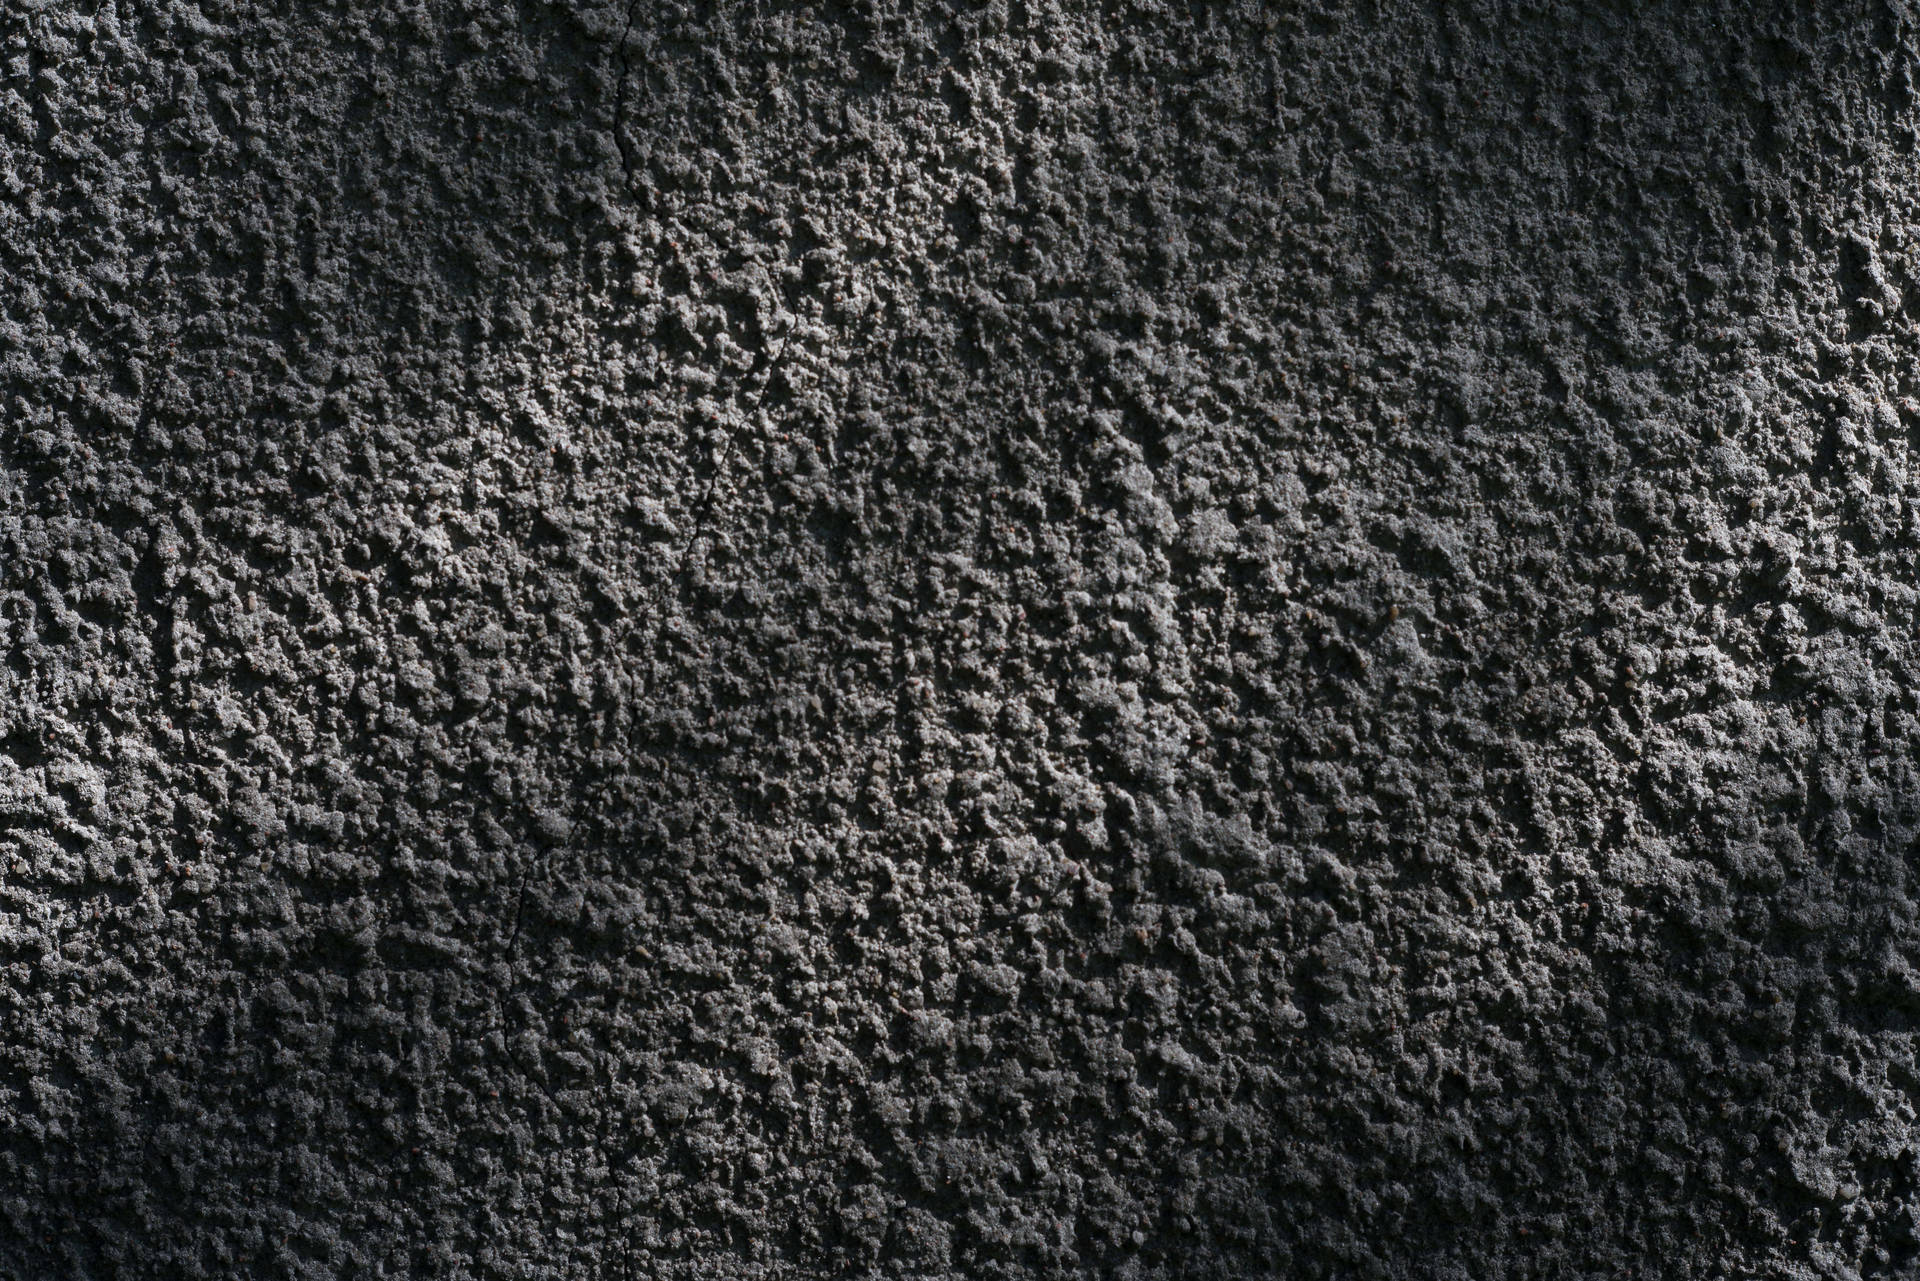 Concrete 7952X5304 Wallpaper and Background Image